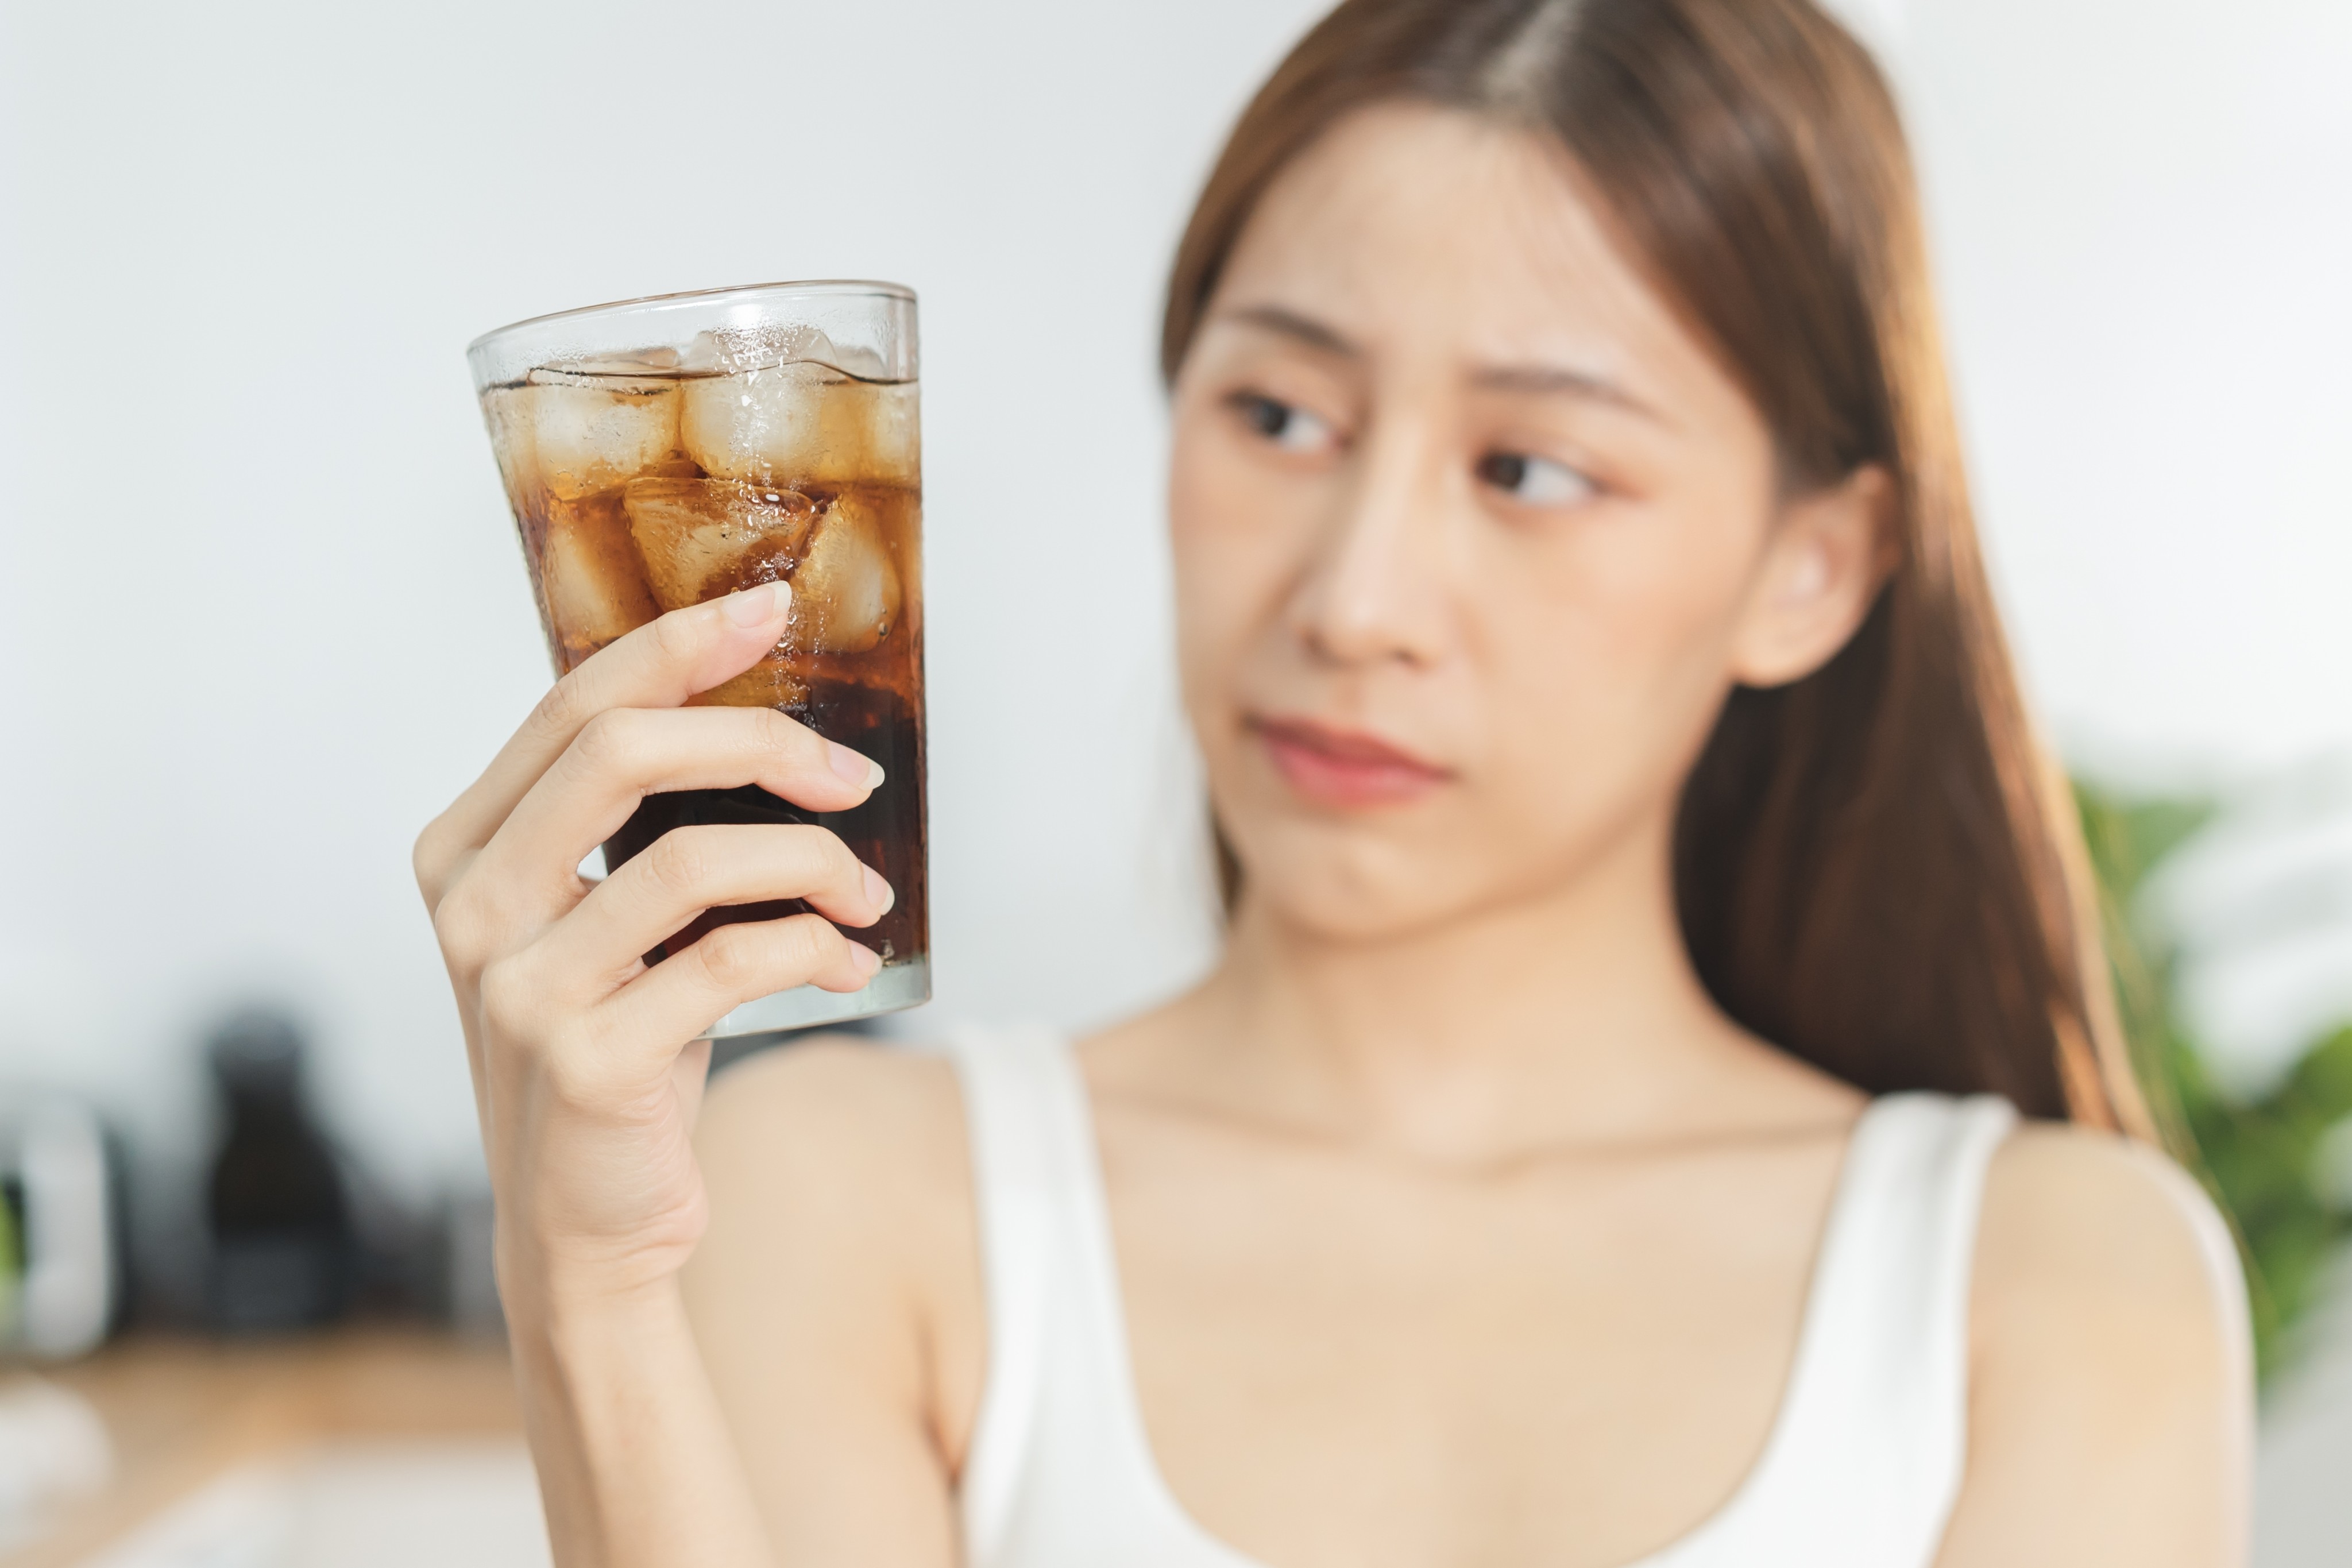 Reduce your risk of cancer, diabetes, depression, heart disease, obesity and gout by limiting sugary drinks to one a week, say the authors of a new study of the impact of sugar consumption. Photo: Shutterstock